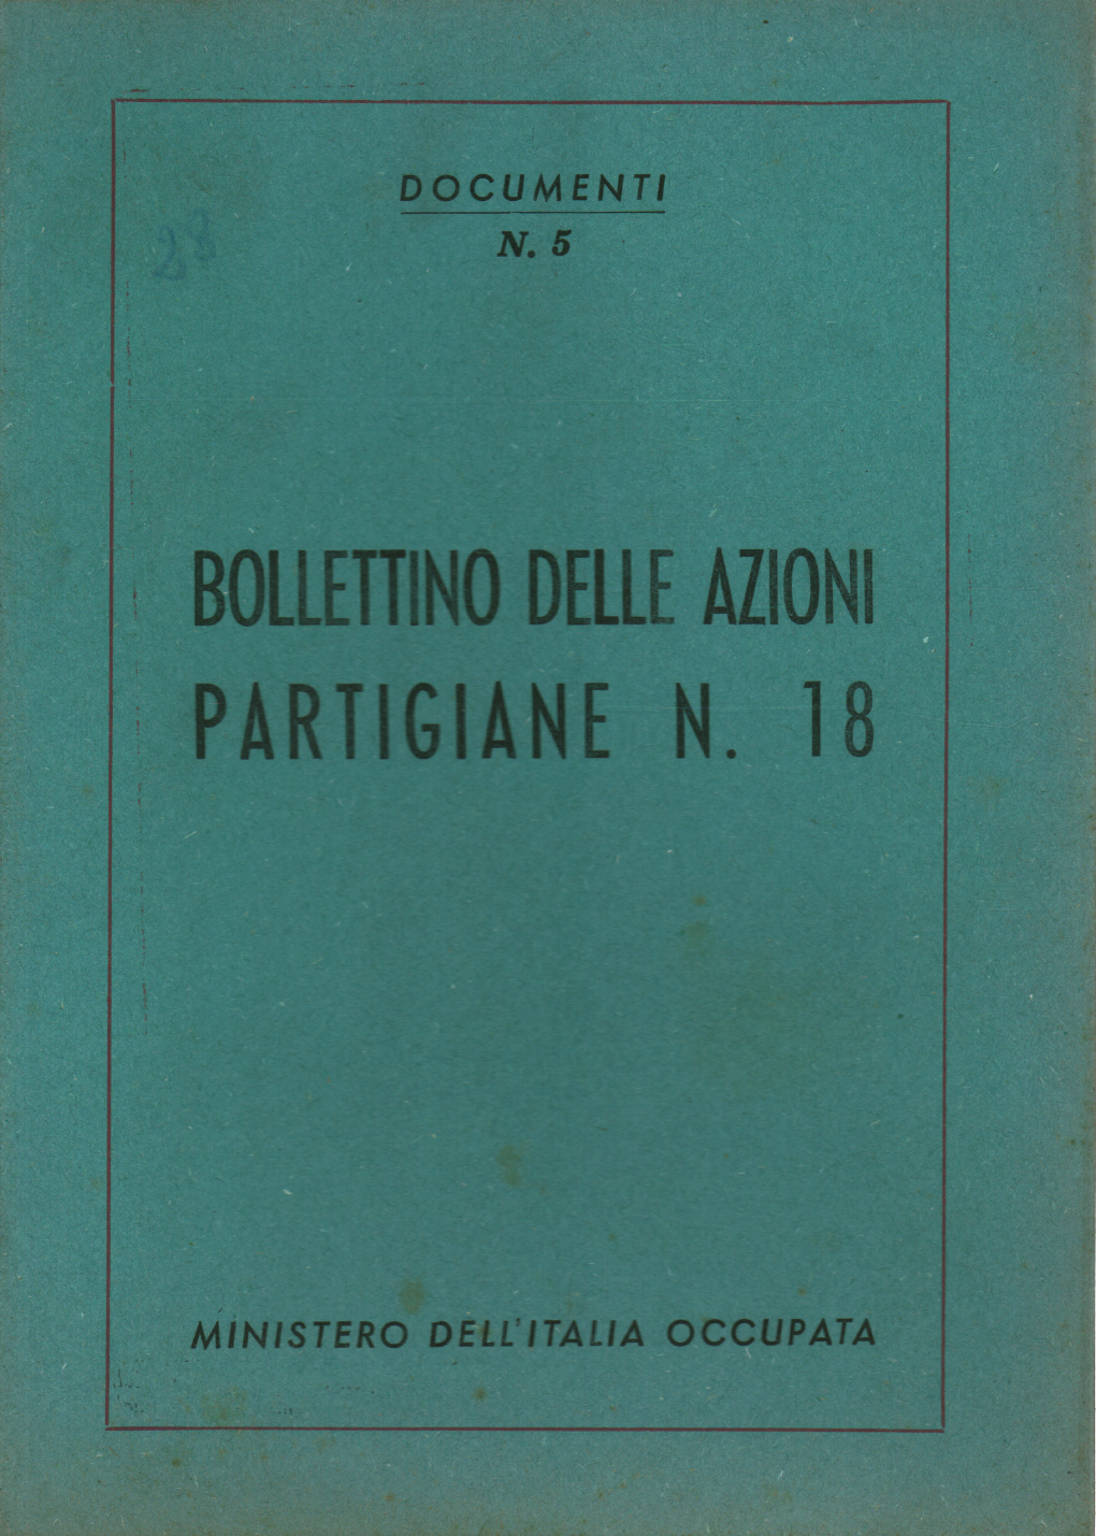 Bulletin of partisan actions n. 18, AA.VV.